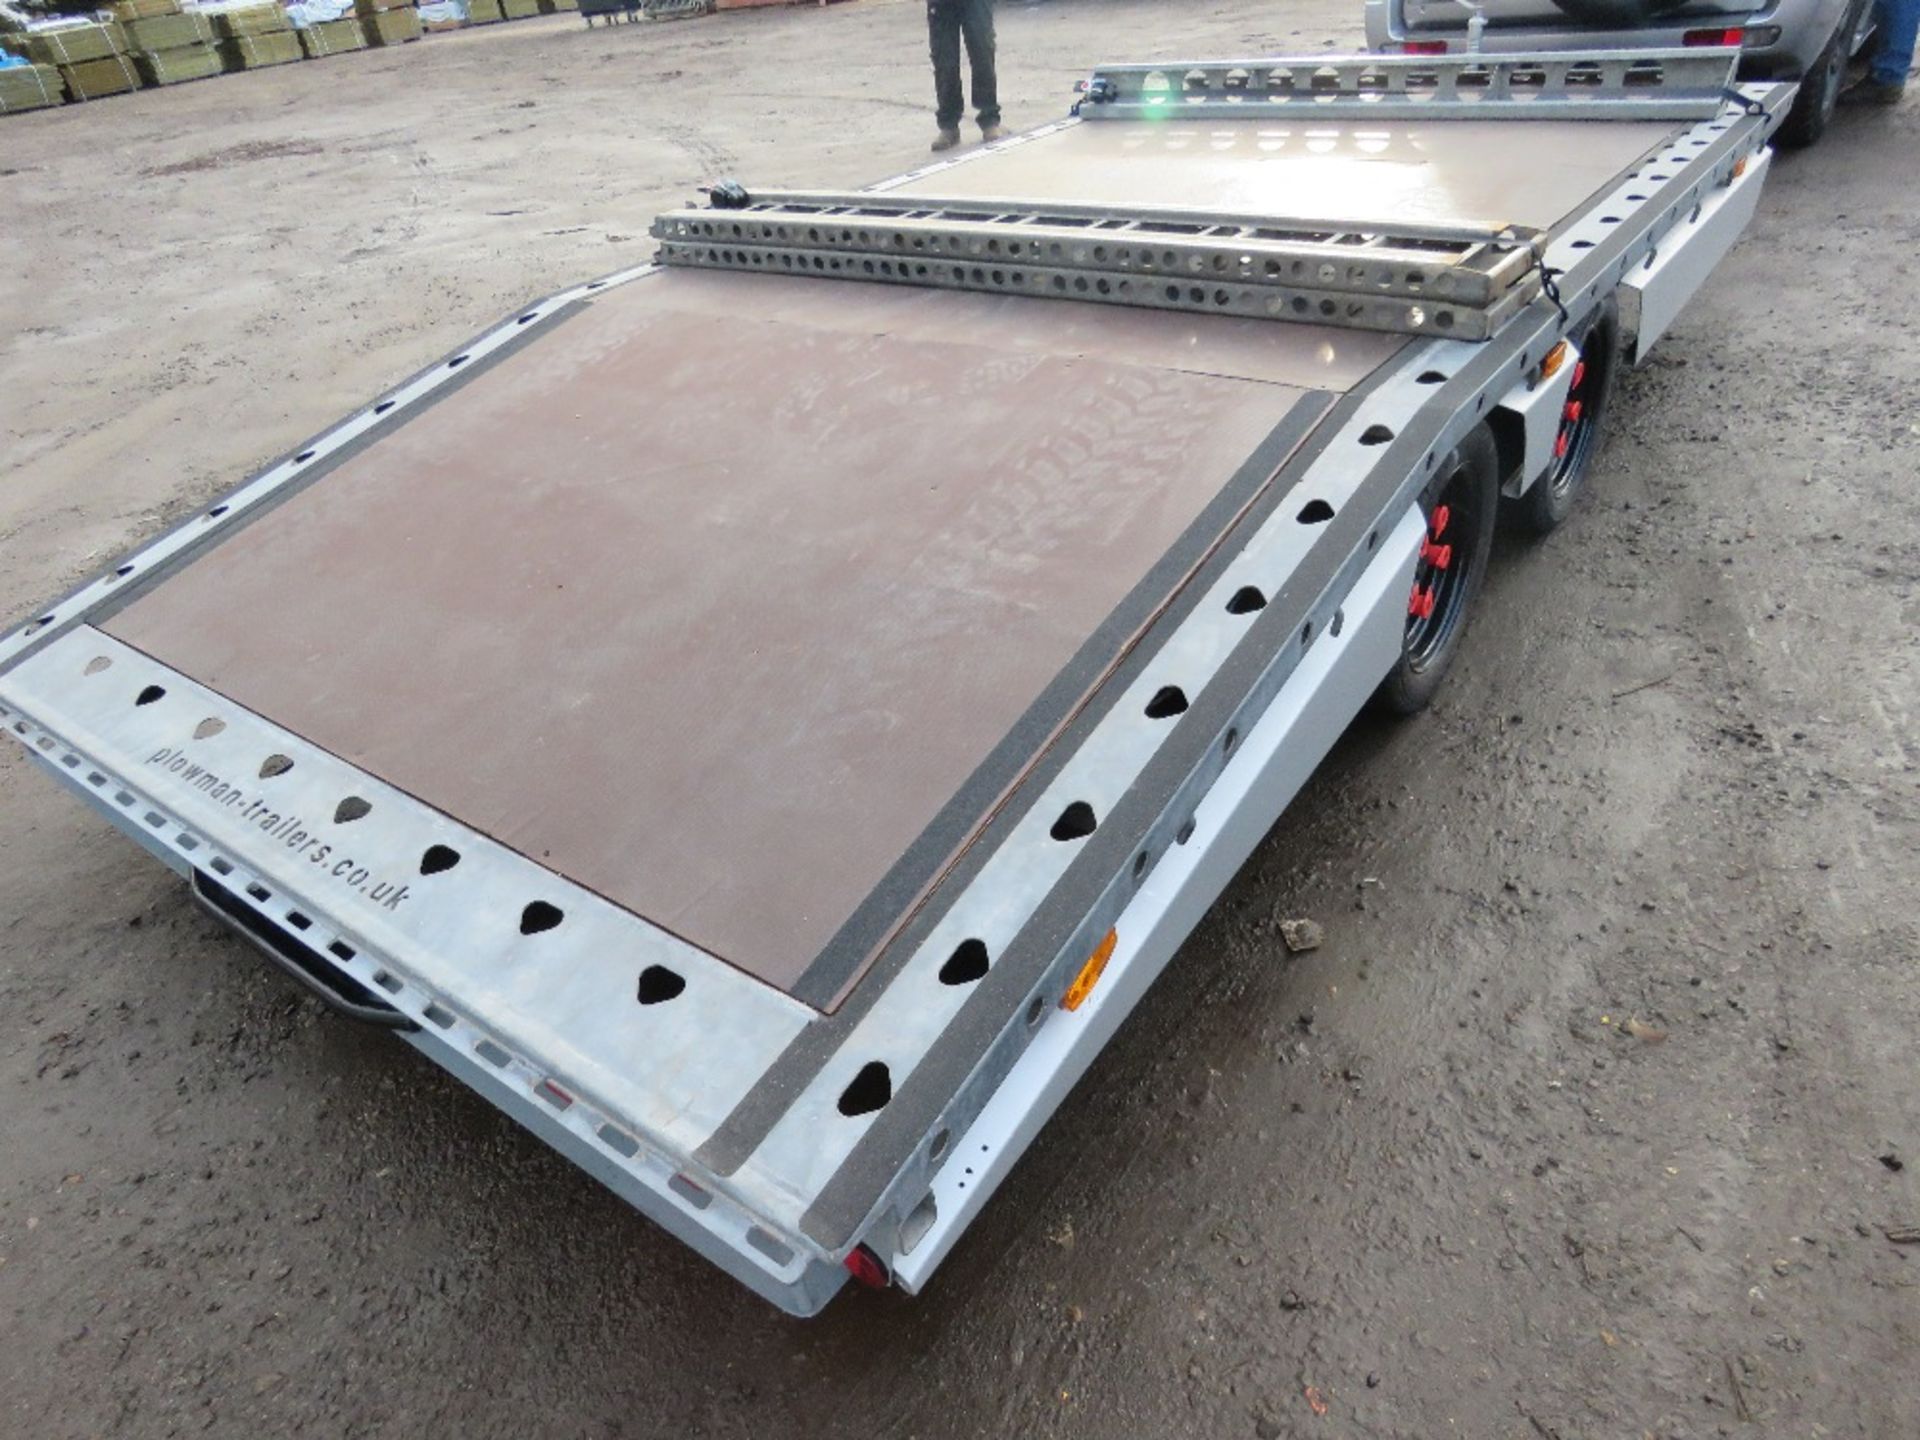 PLOWMAN PCT41 TWIN AXLED BEAVERTAIL TRAILER. 13FT X 7FT BED APPROX WITH RAMPS AS SHOWN. 3OOOKG RATED - Image 4 of 8